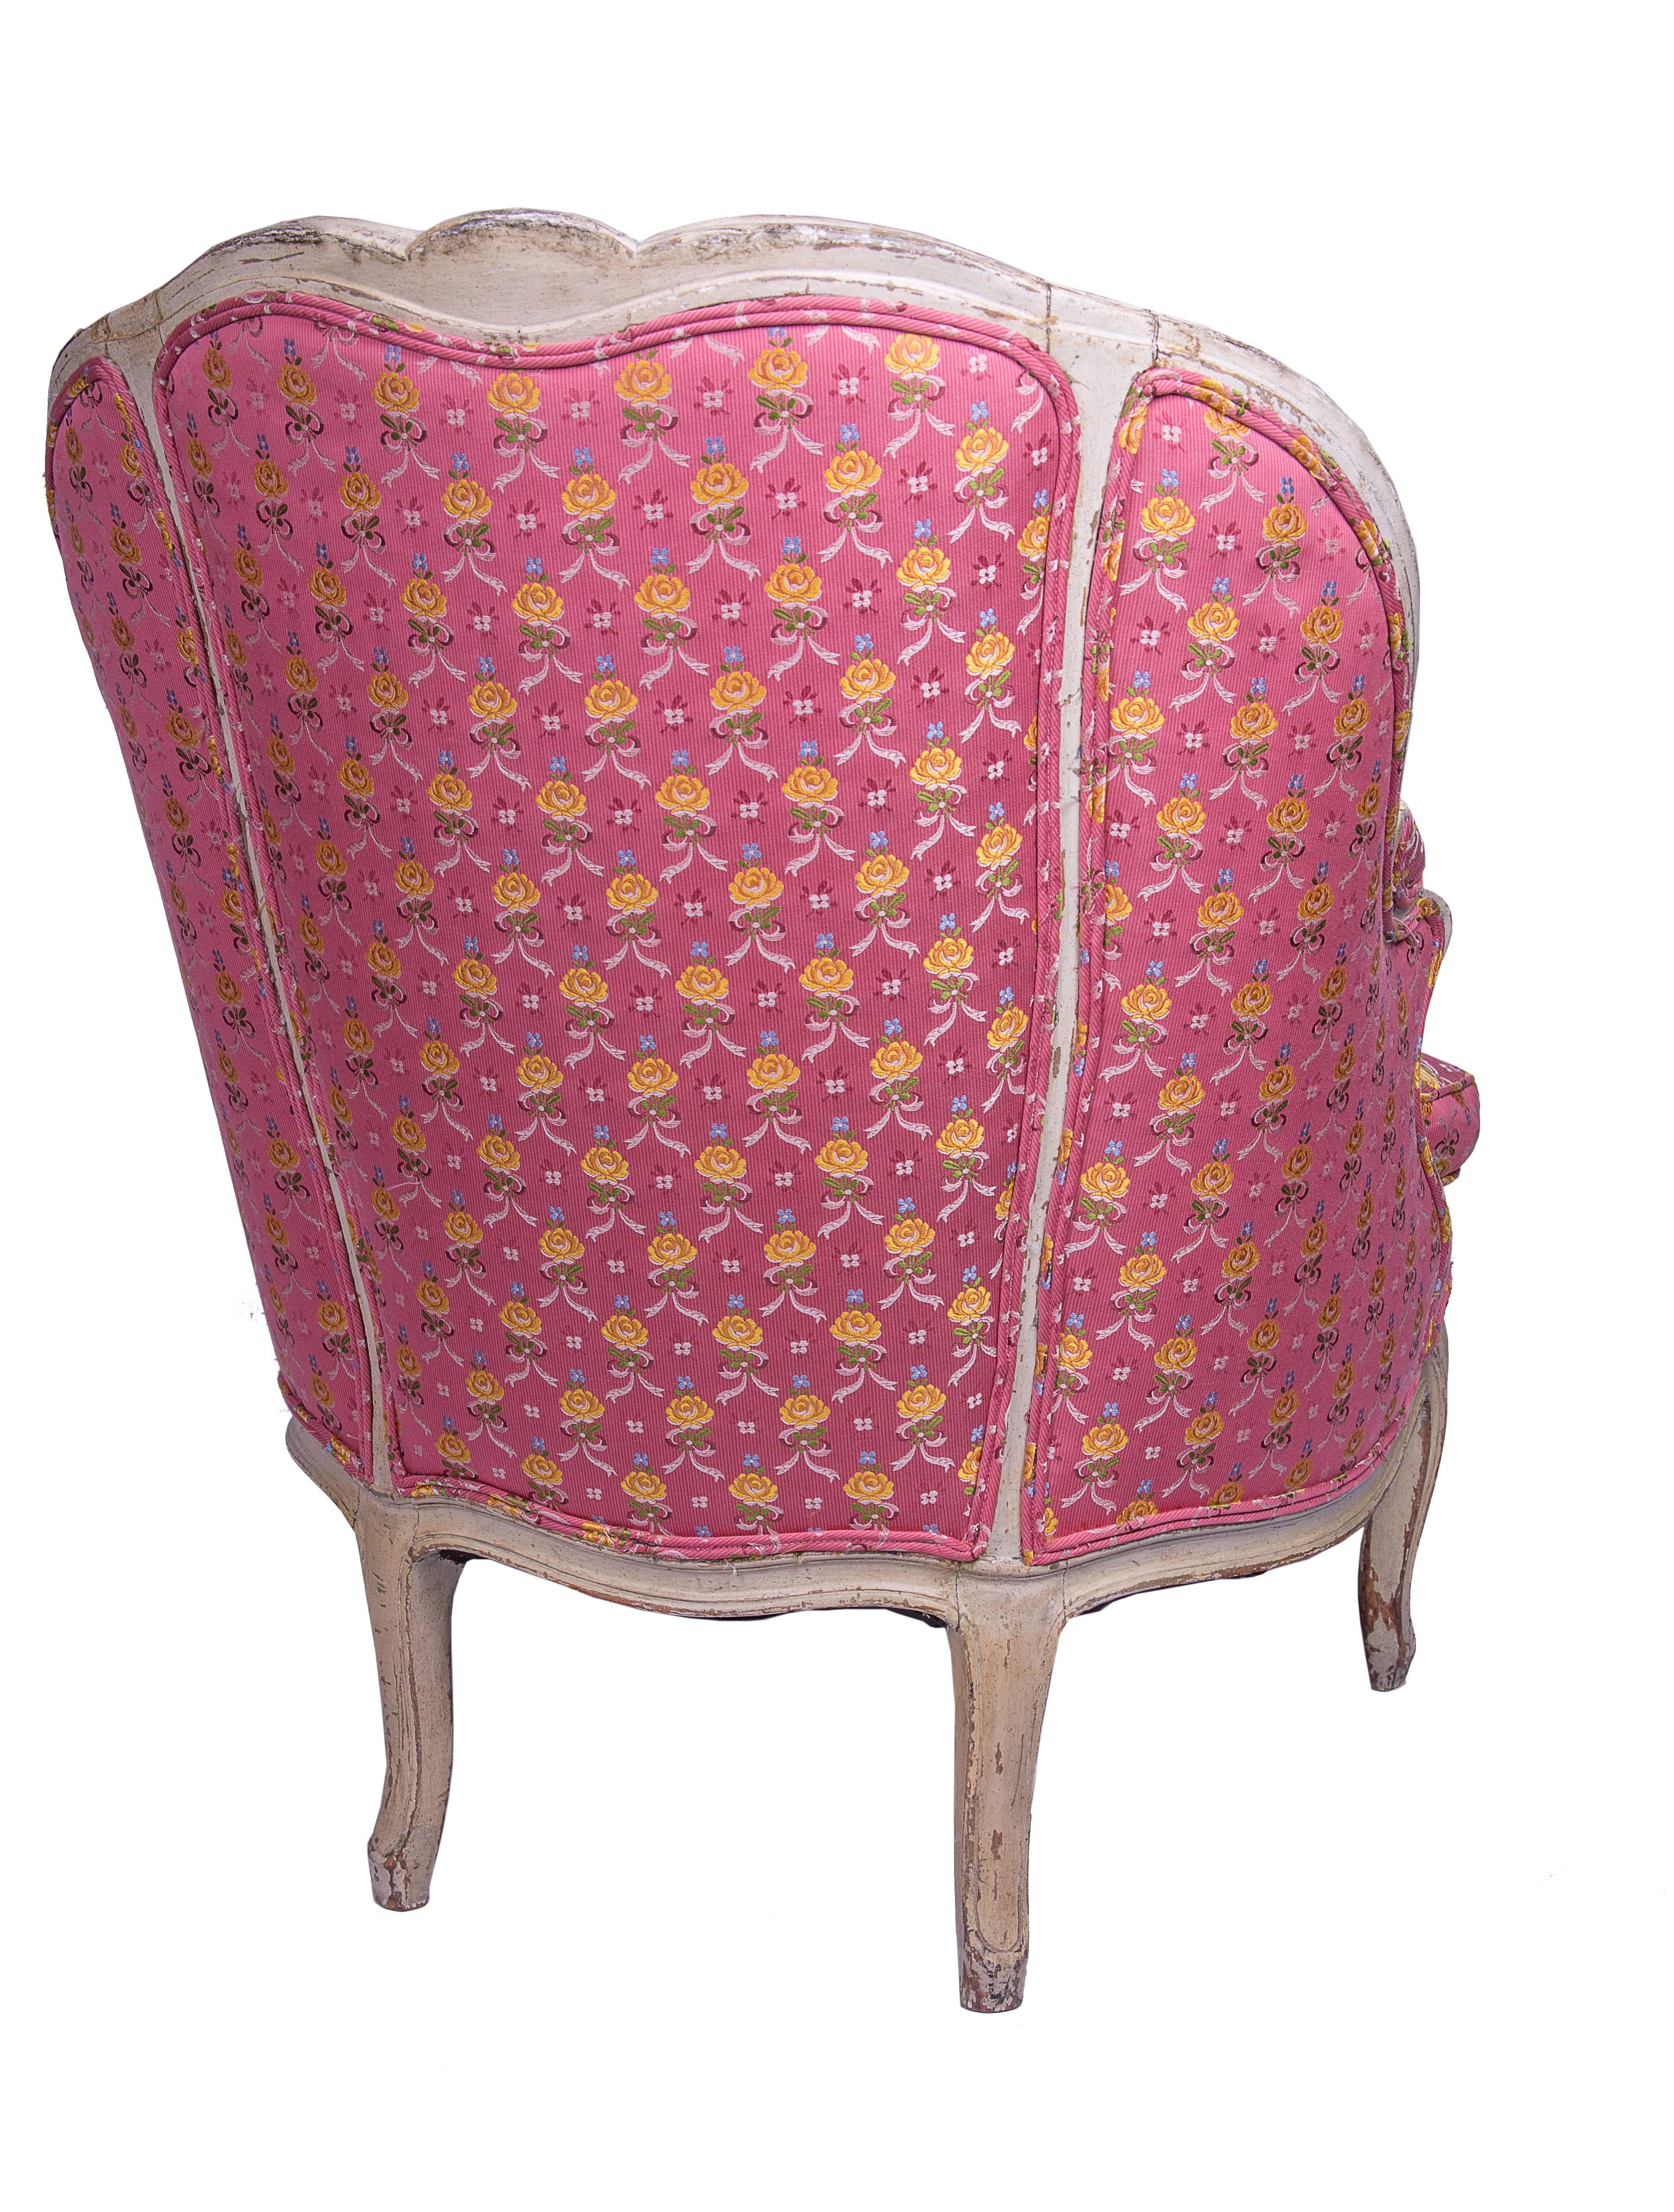 19th century French Louis XV style bergere is carved and cream painted, upholstered with loose cushion.